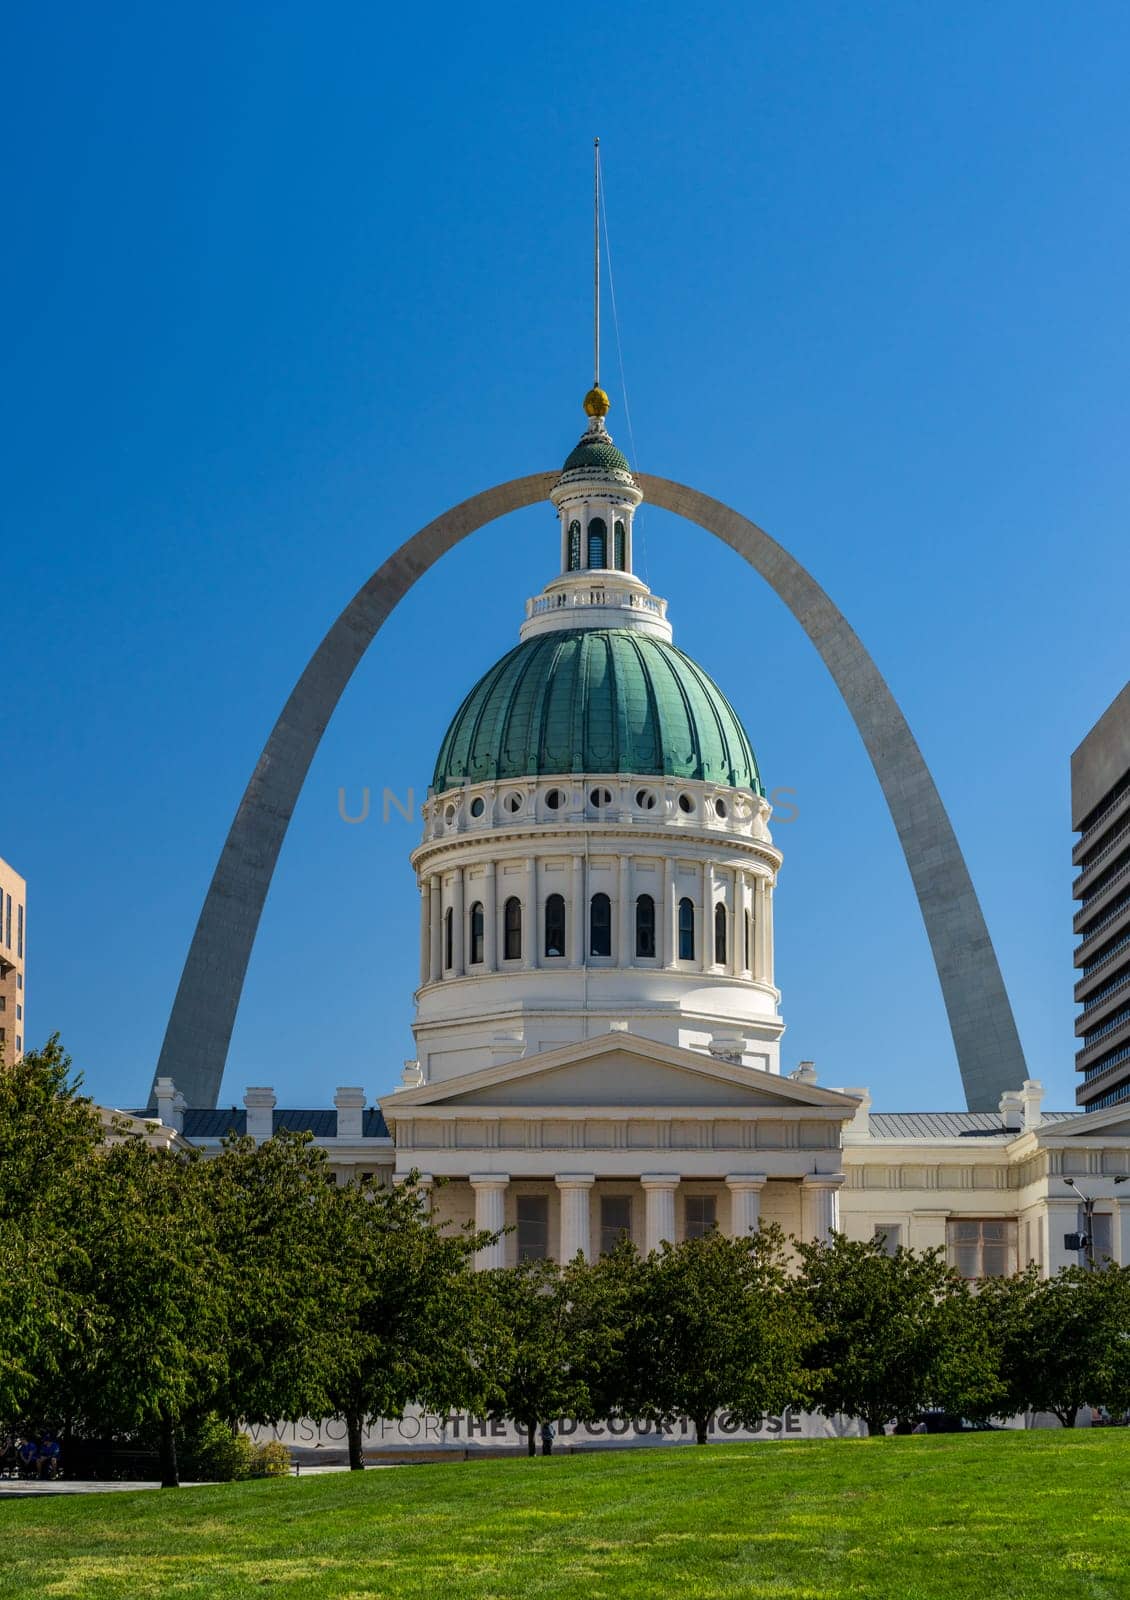 Dome of the old Courthouse in St Louis Missouri against the blue sky and the famous Gateway Arch framing the building